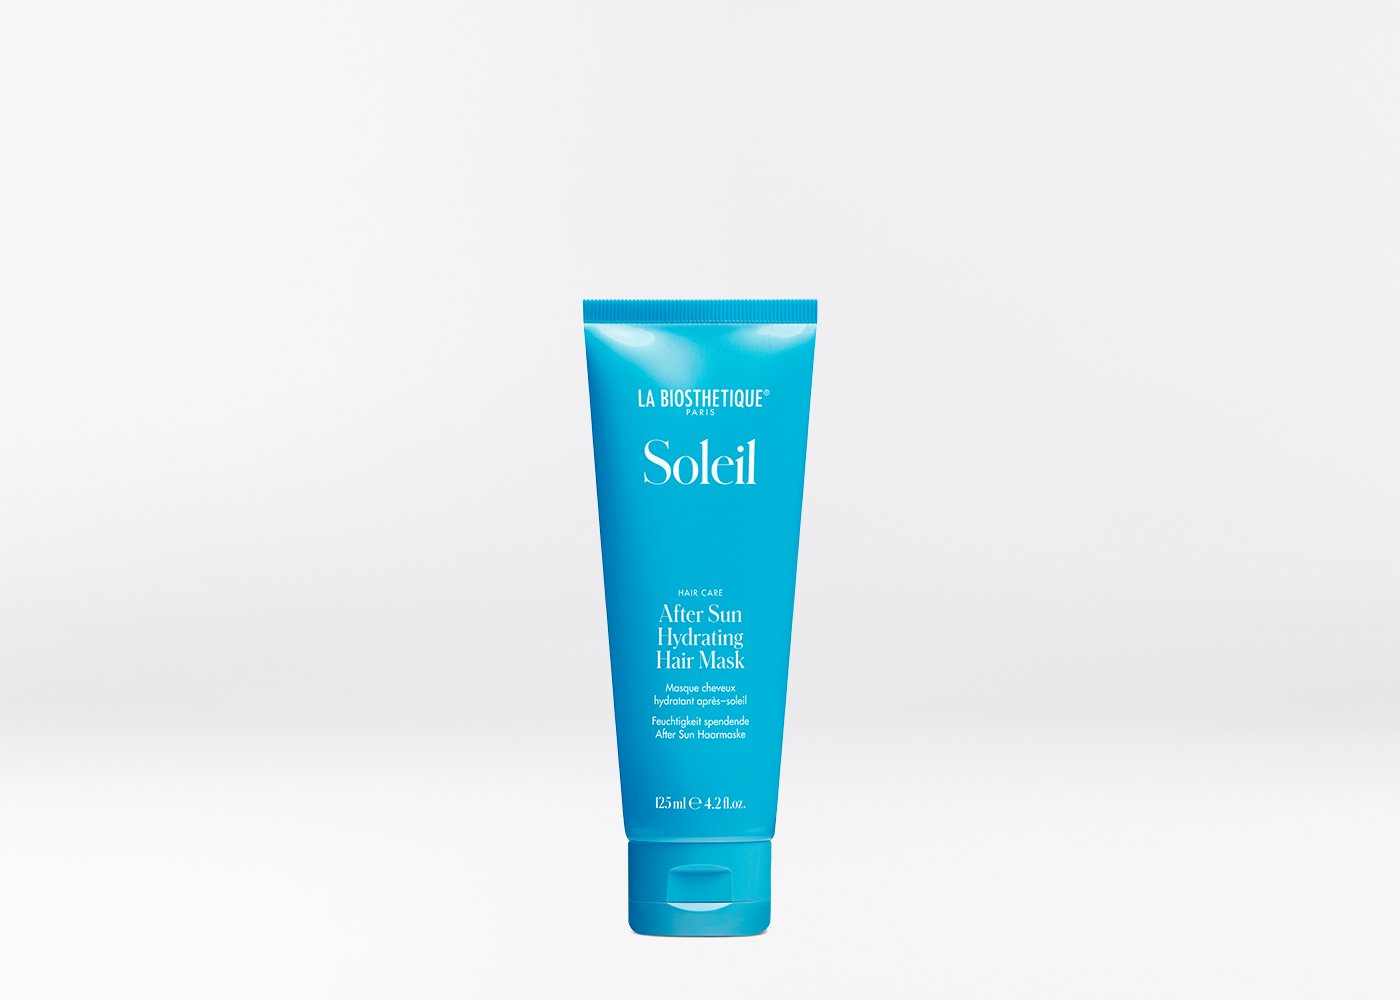 After Sun Hydrating Hair Mask